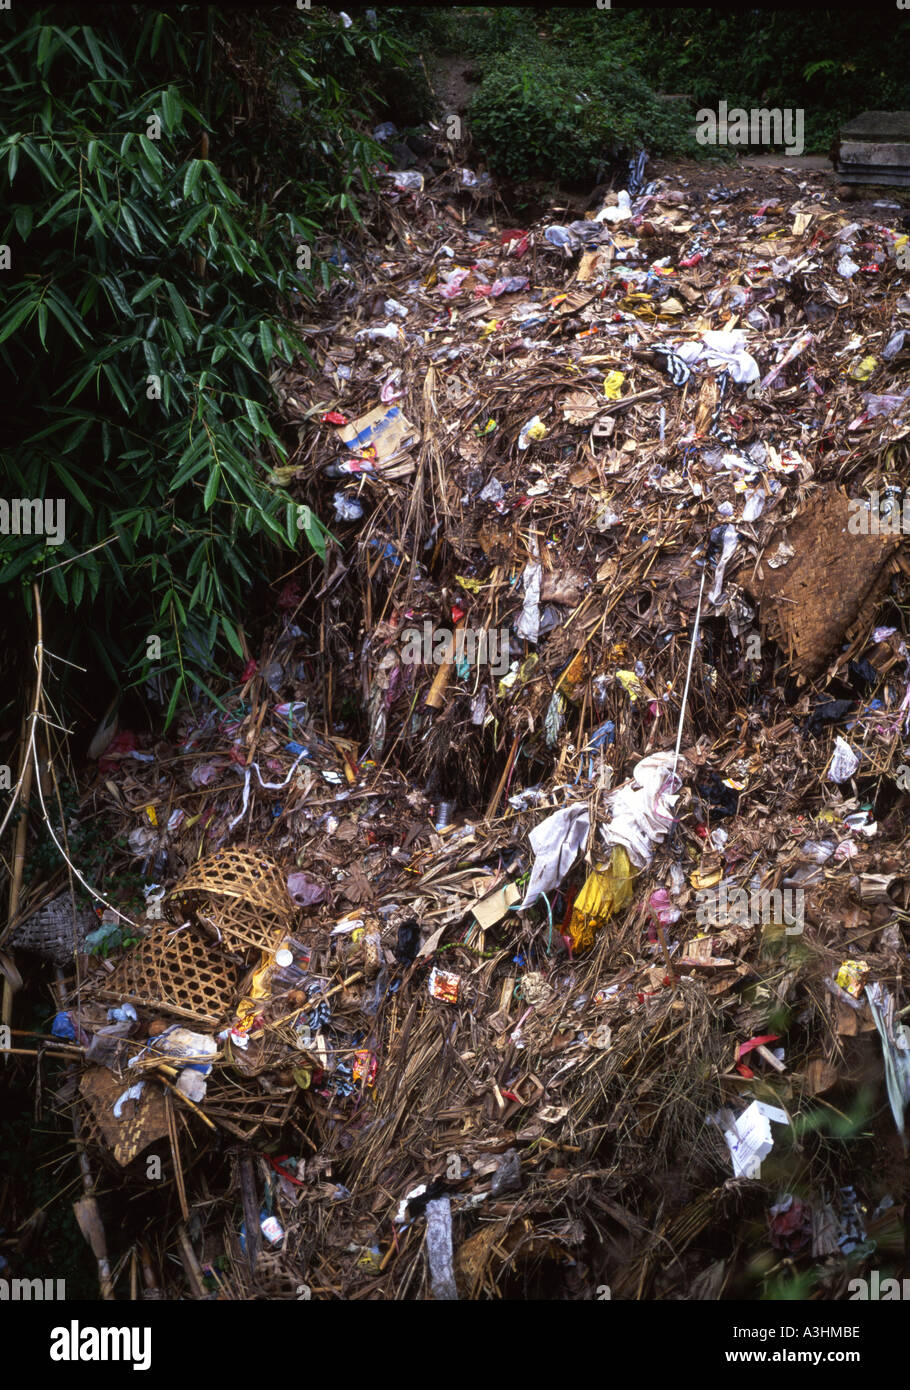 Litter strewn down the banks of a beauty spot,a common sight in Indonesia Stock Photo